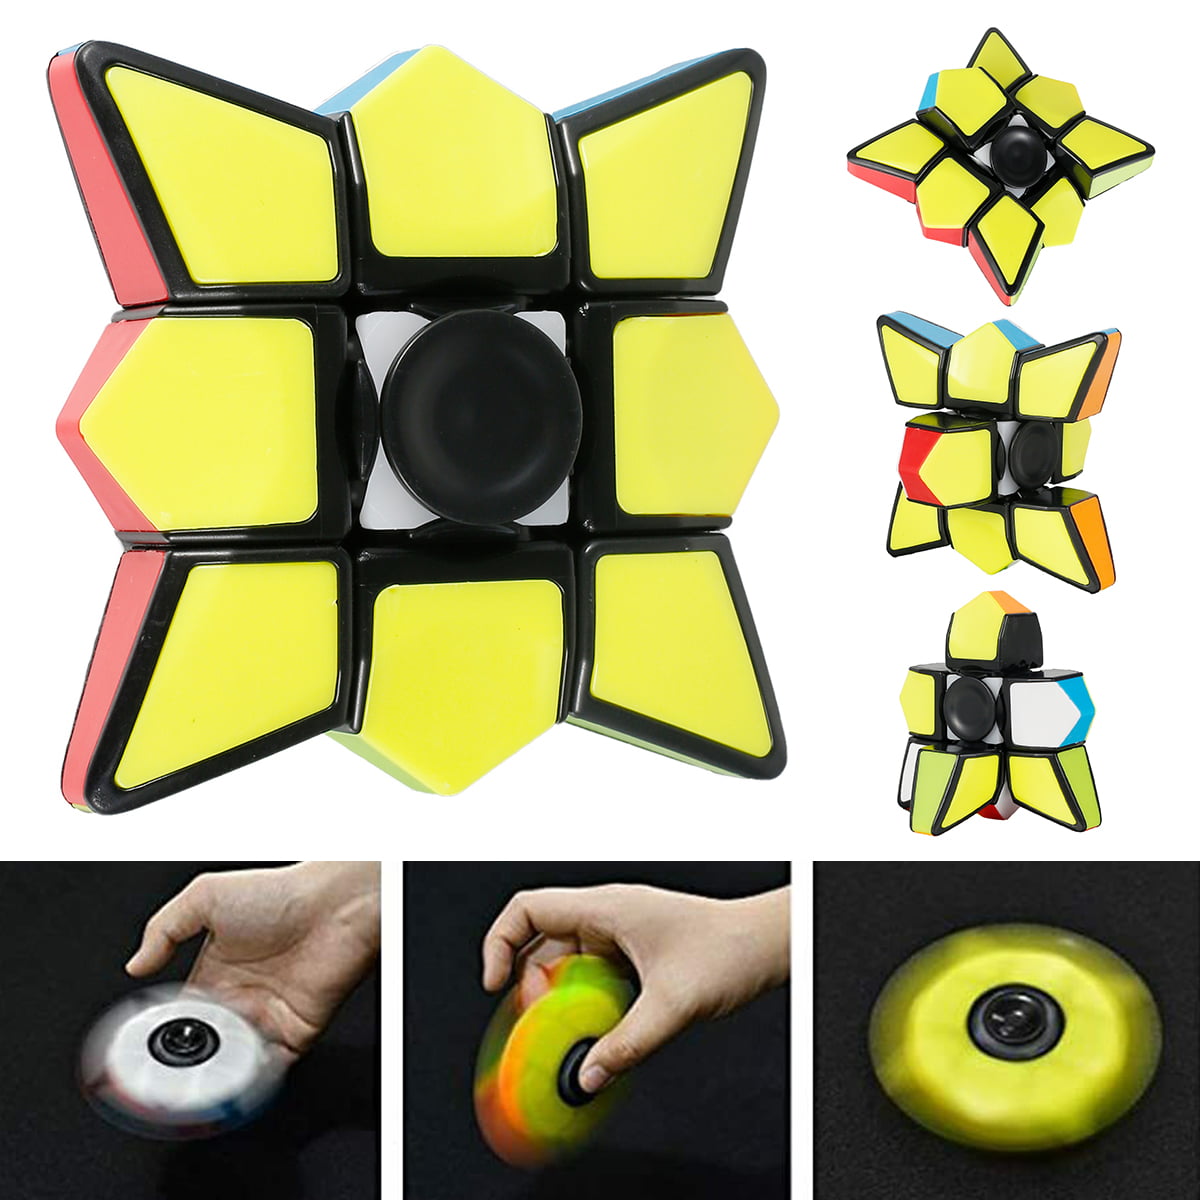 Fidget Spinning Gyro Cube Colors Vary 